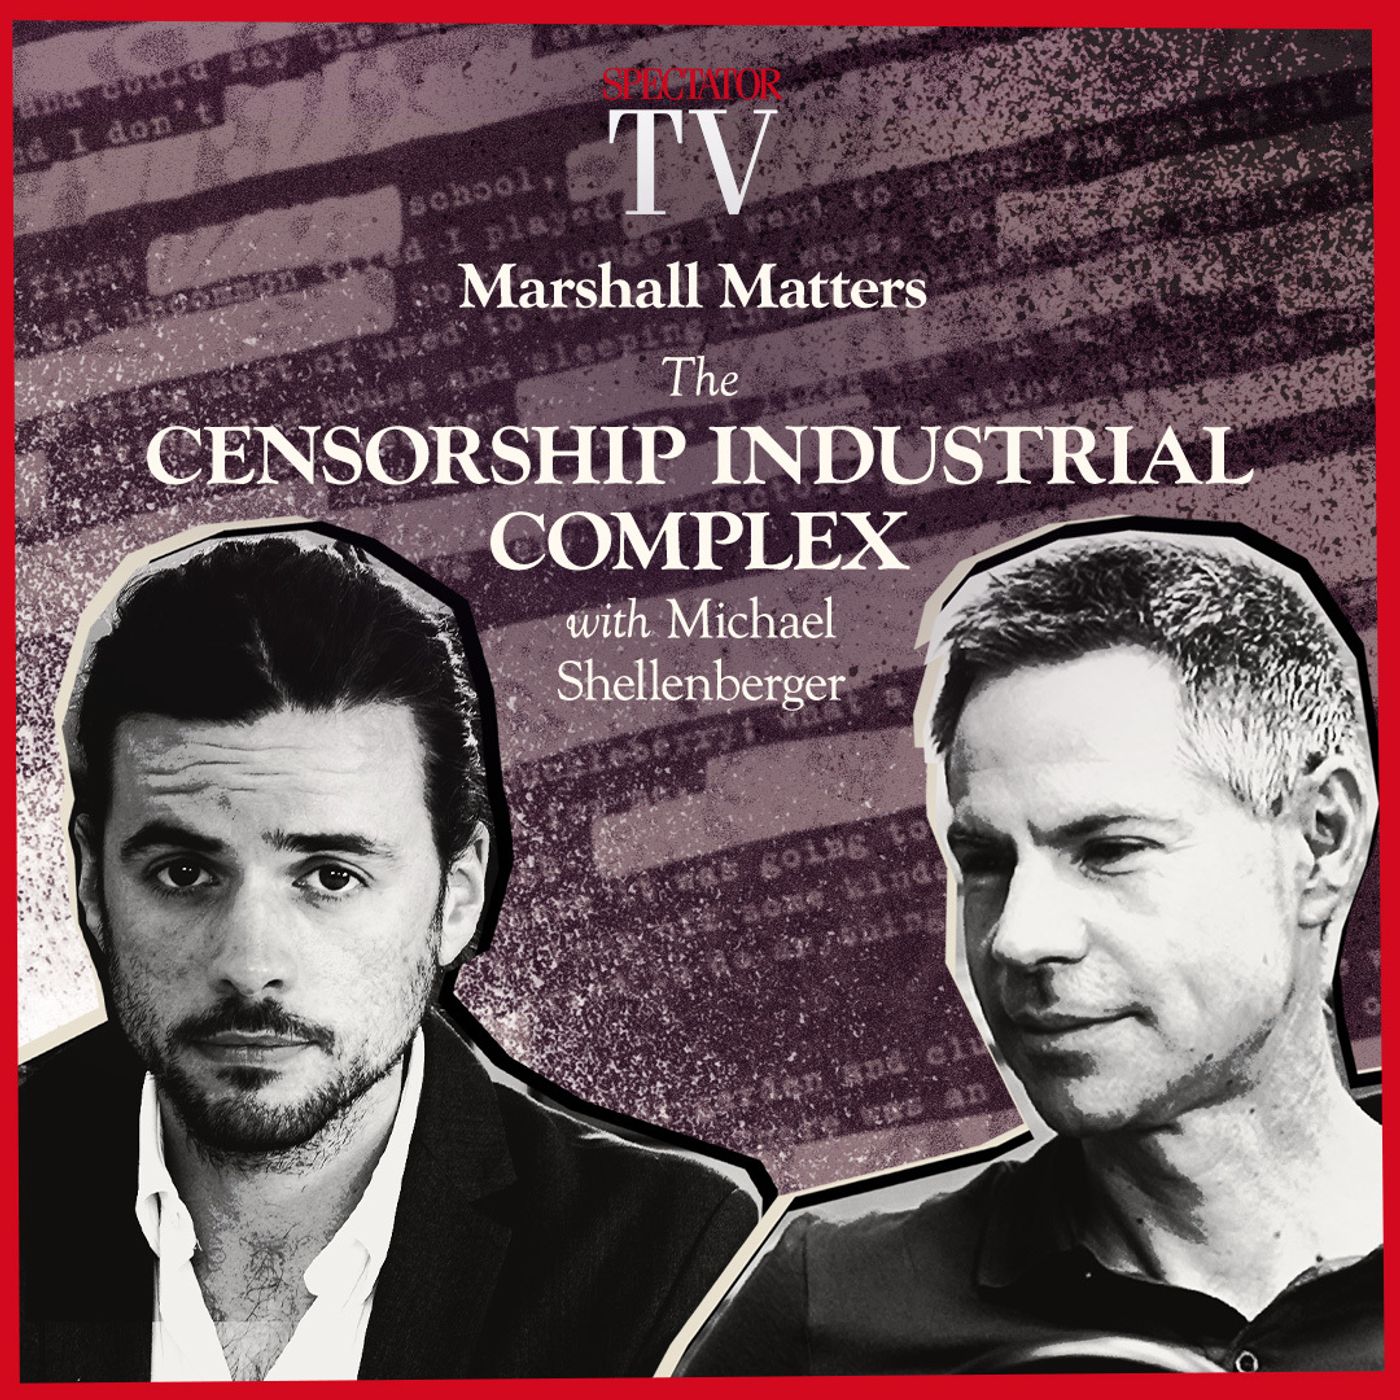 Michael Shellenberger: Exposing the censorship industrial complex